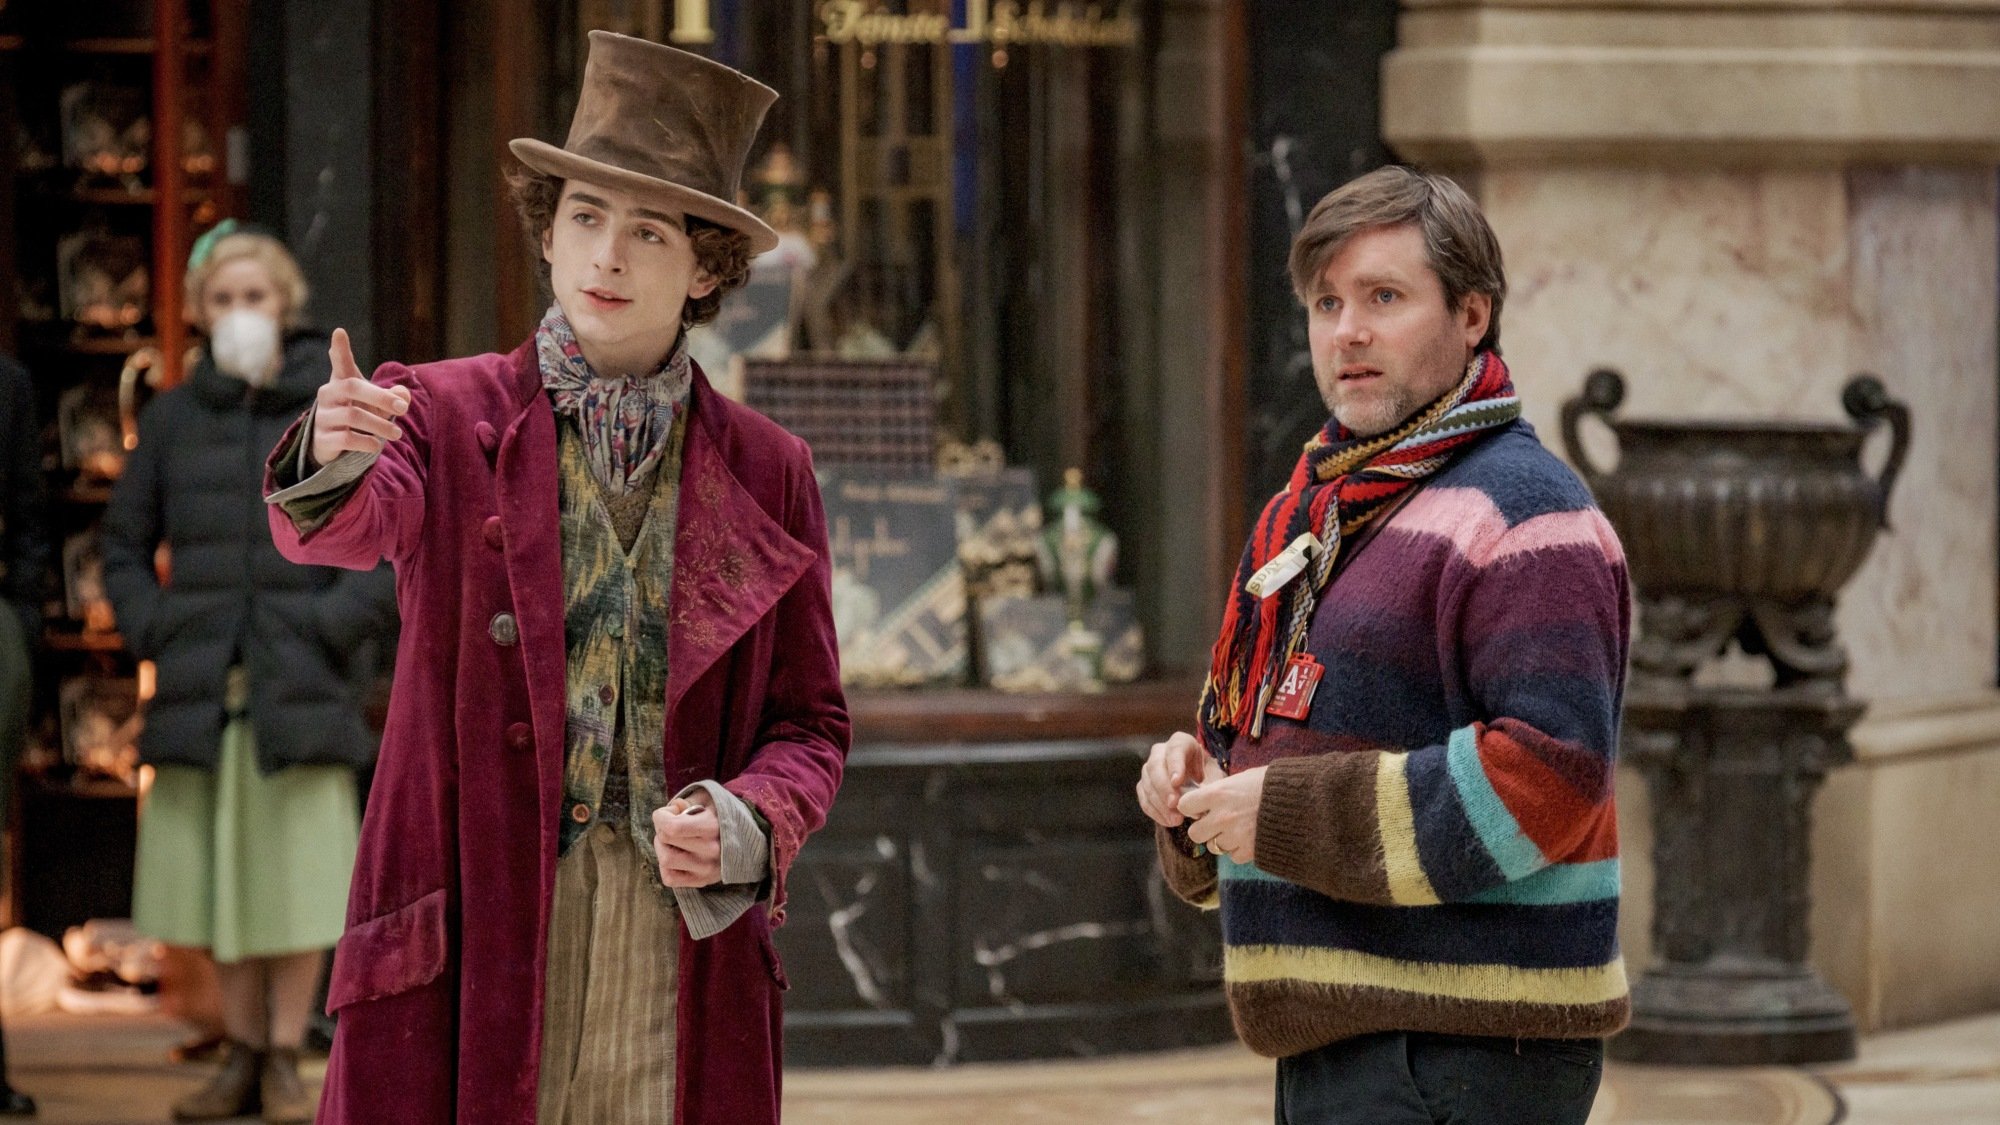 Paul King and Timothée Chalamet on the set of "Wonka."